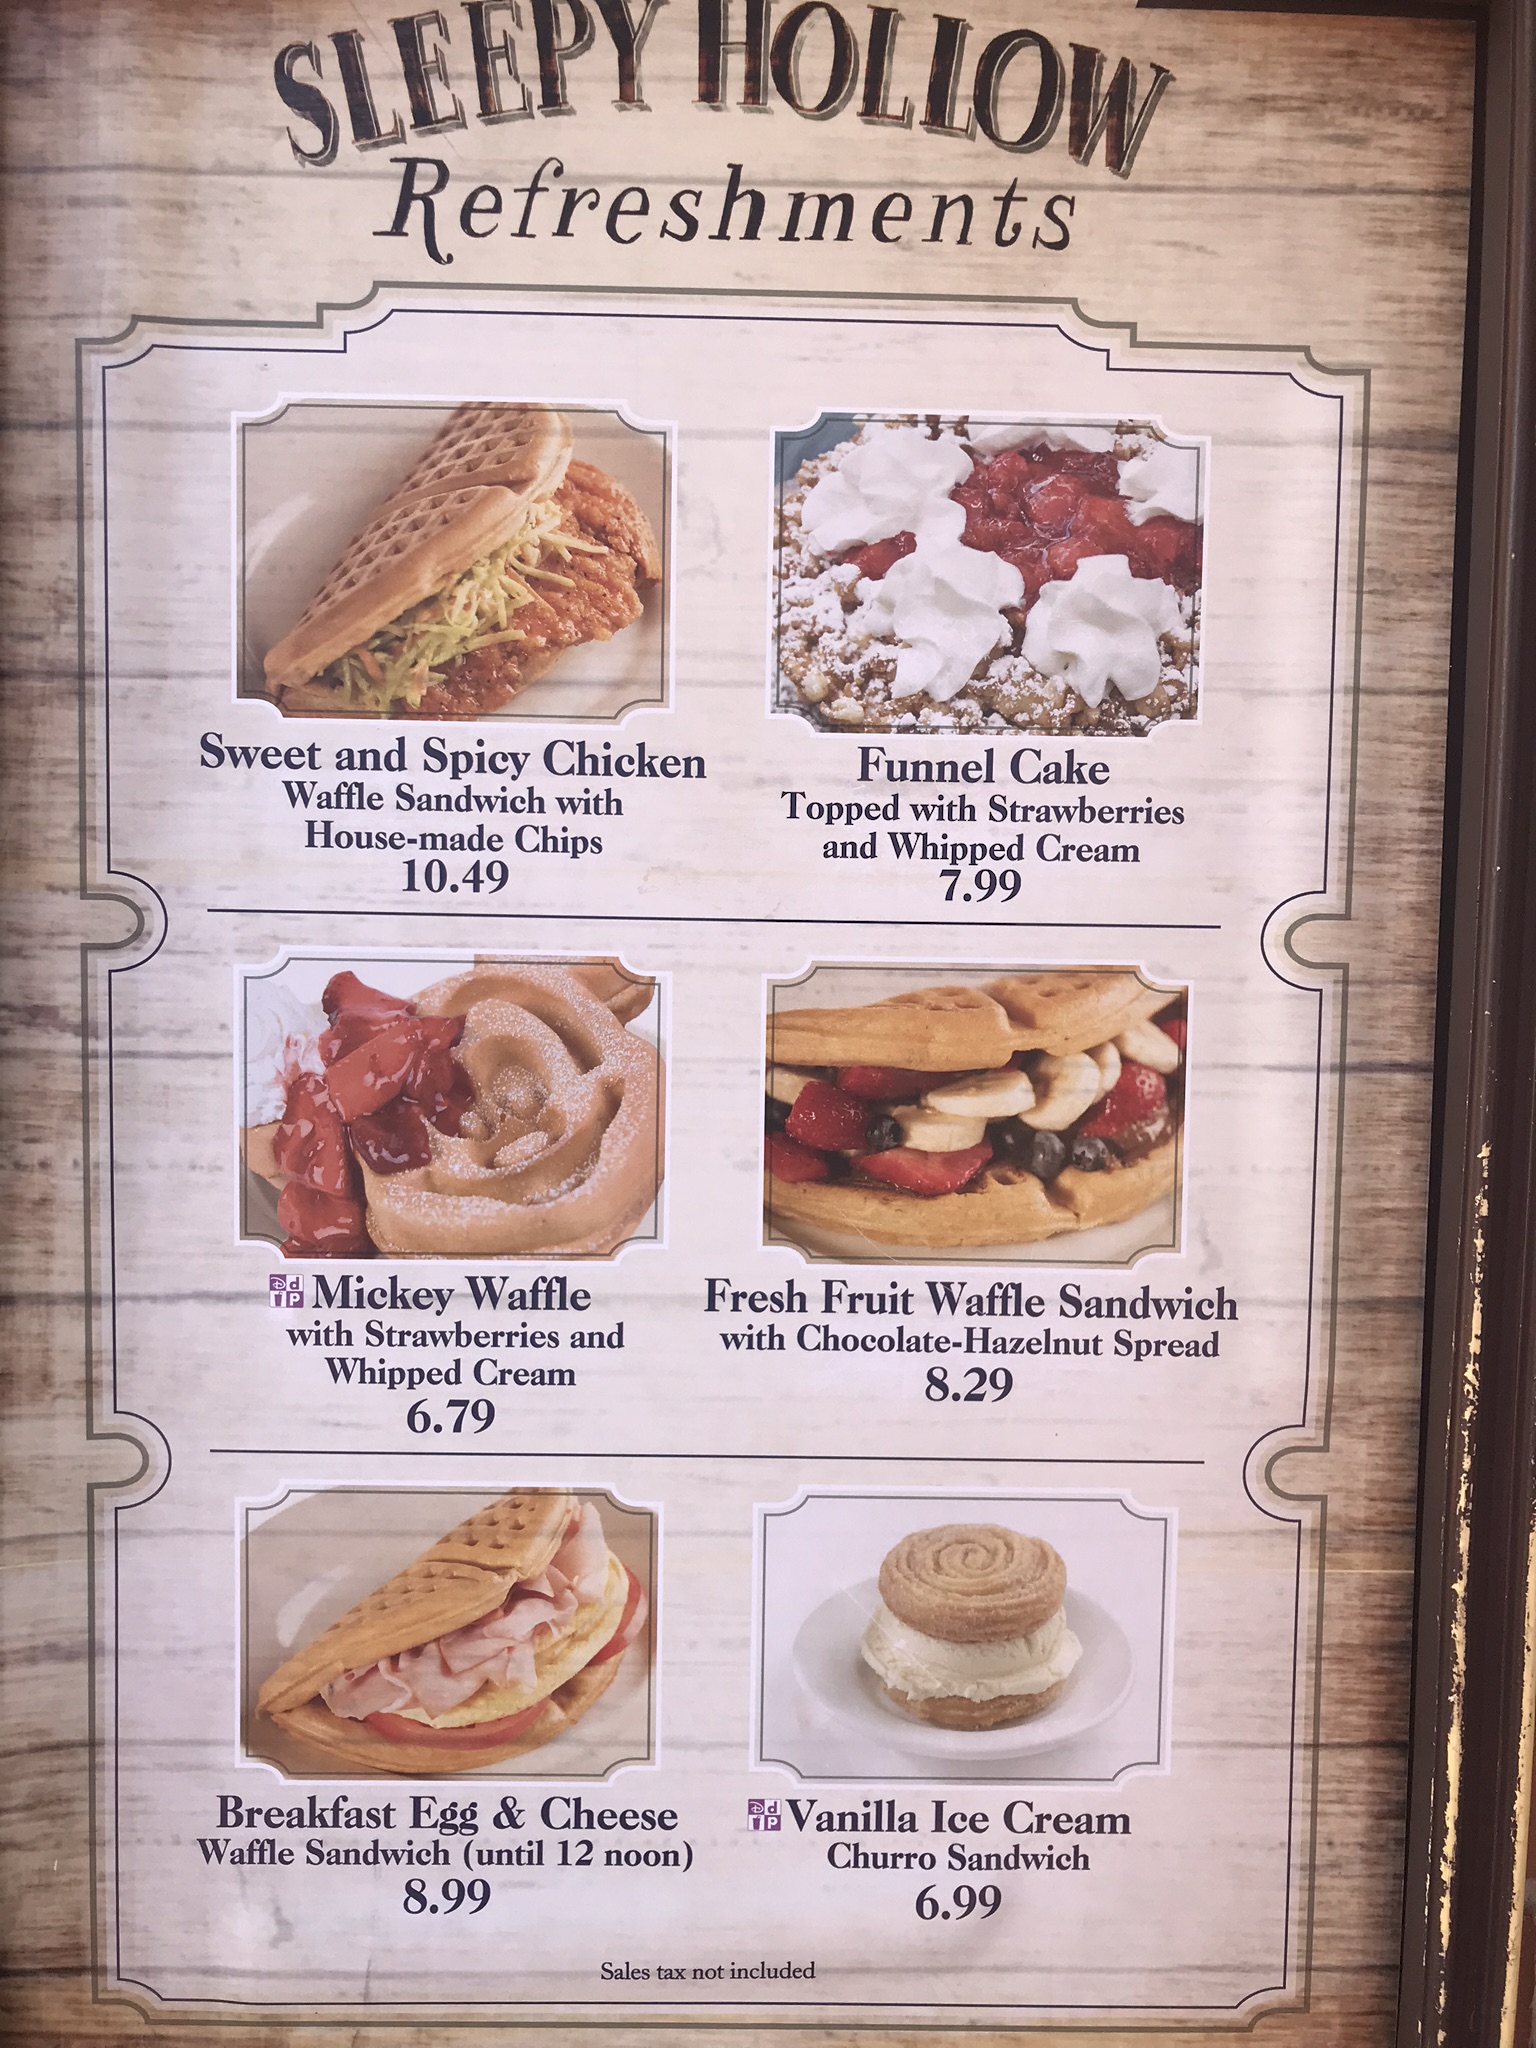 Best Magic Kingdom Quick Service Restaurants (And The Worst) - The